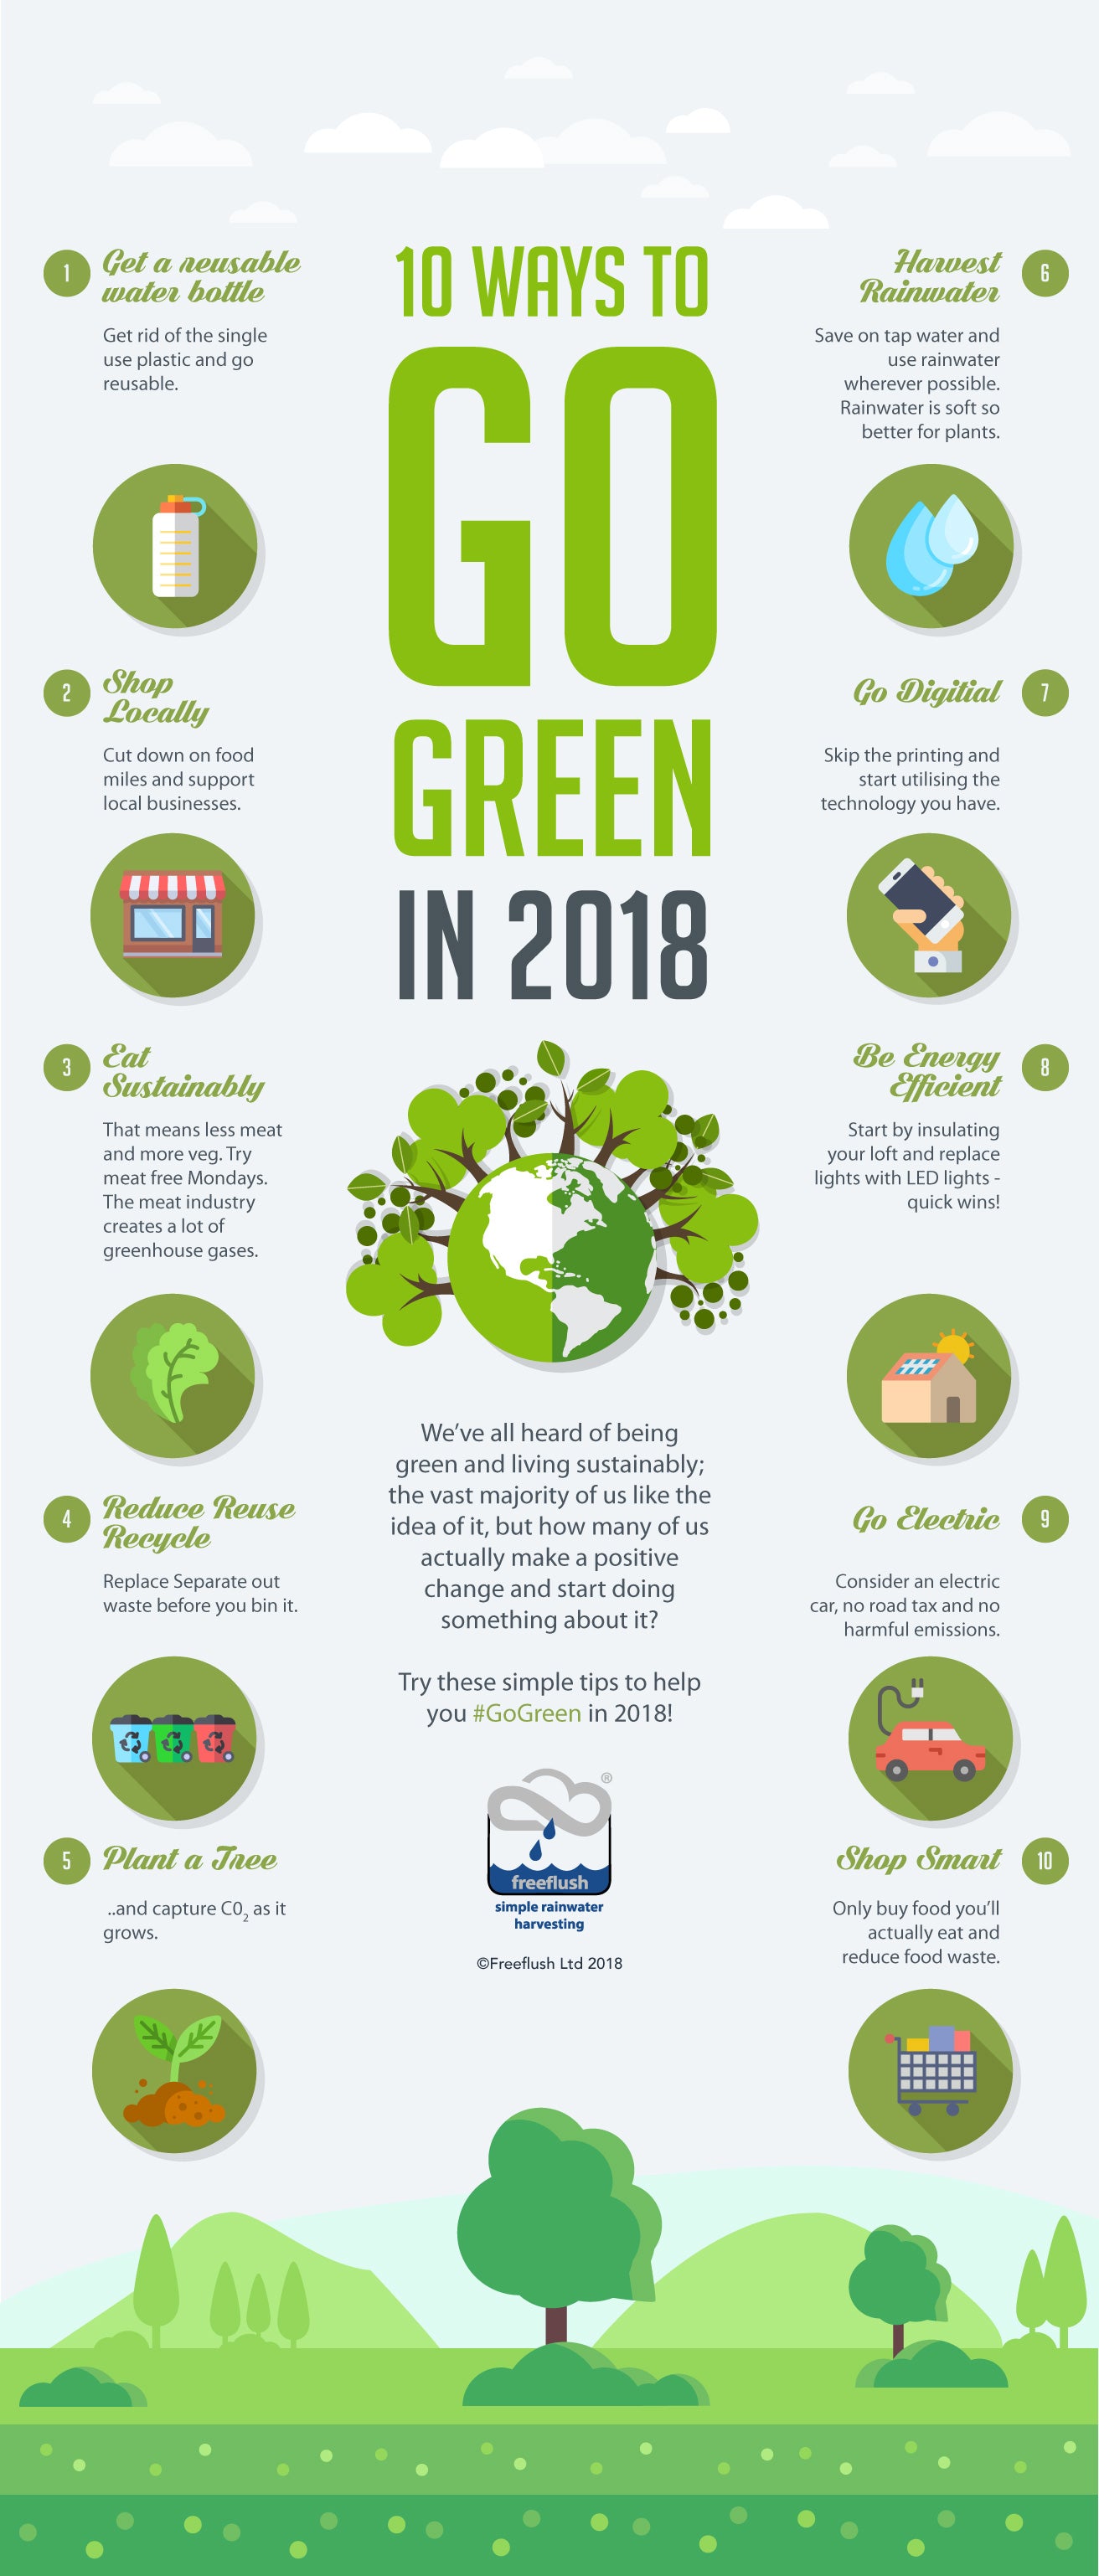 Go Green in 2018 with freeflush